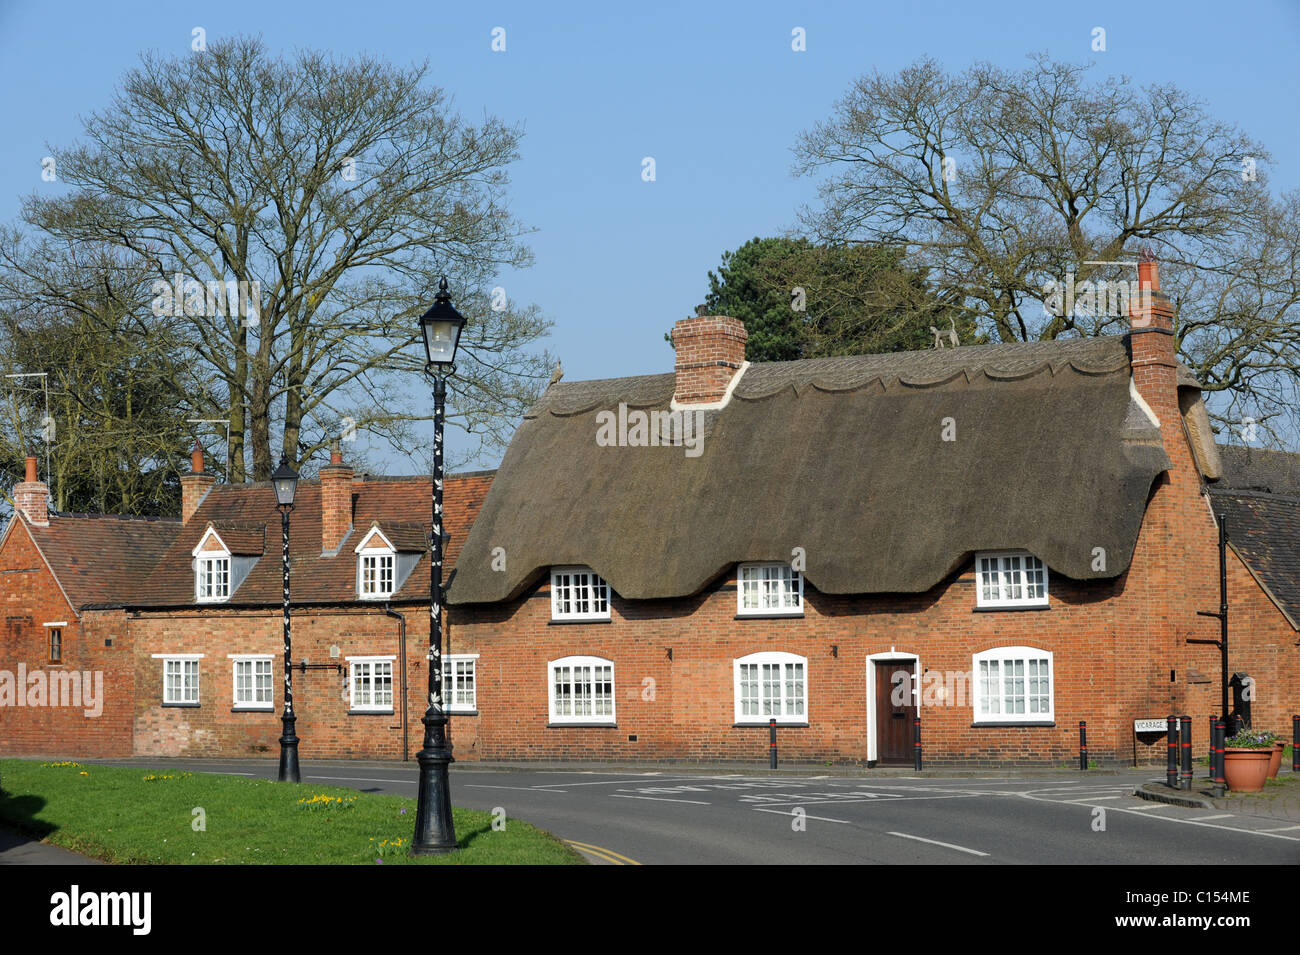 The village of Dunchurch In Warwickshire England Uk Stock Photo